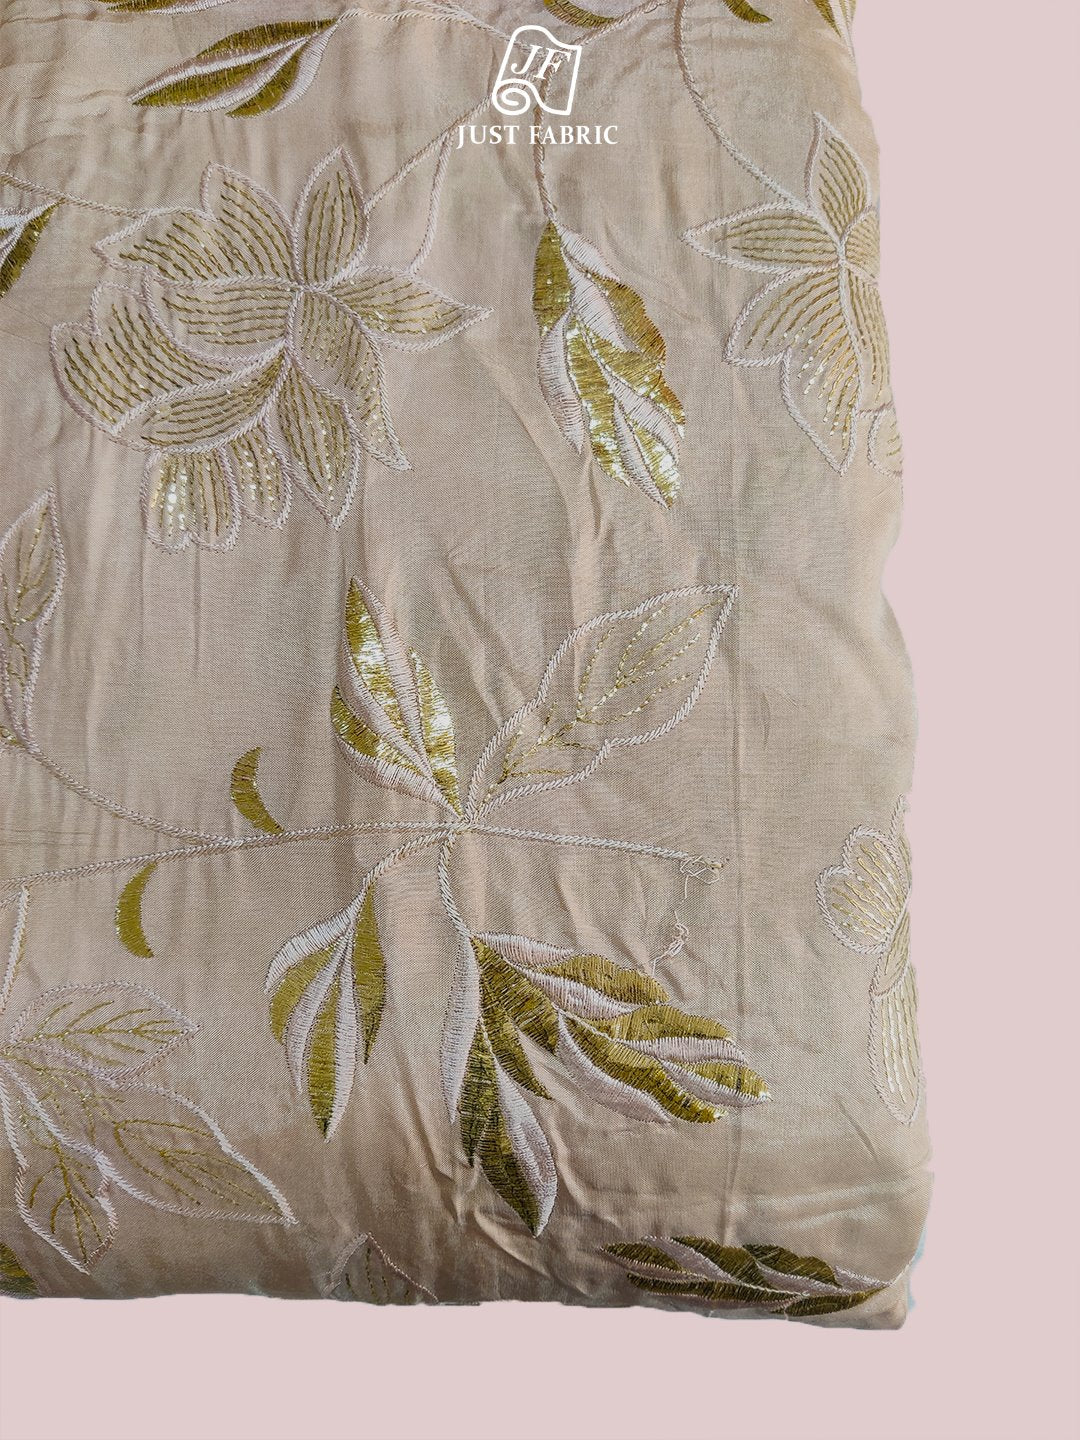 Thread & Golden  Foil work of Floral Jaal Allover on Upada Silk Fabric With Embroidery ( 44" Inch Width) JUST FABRIC